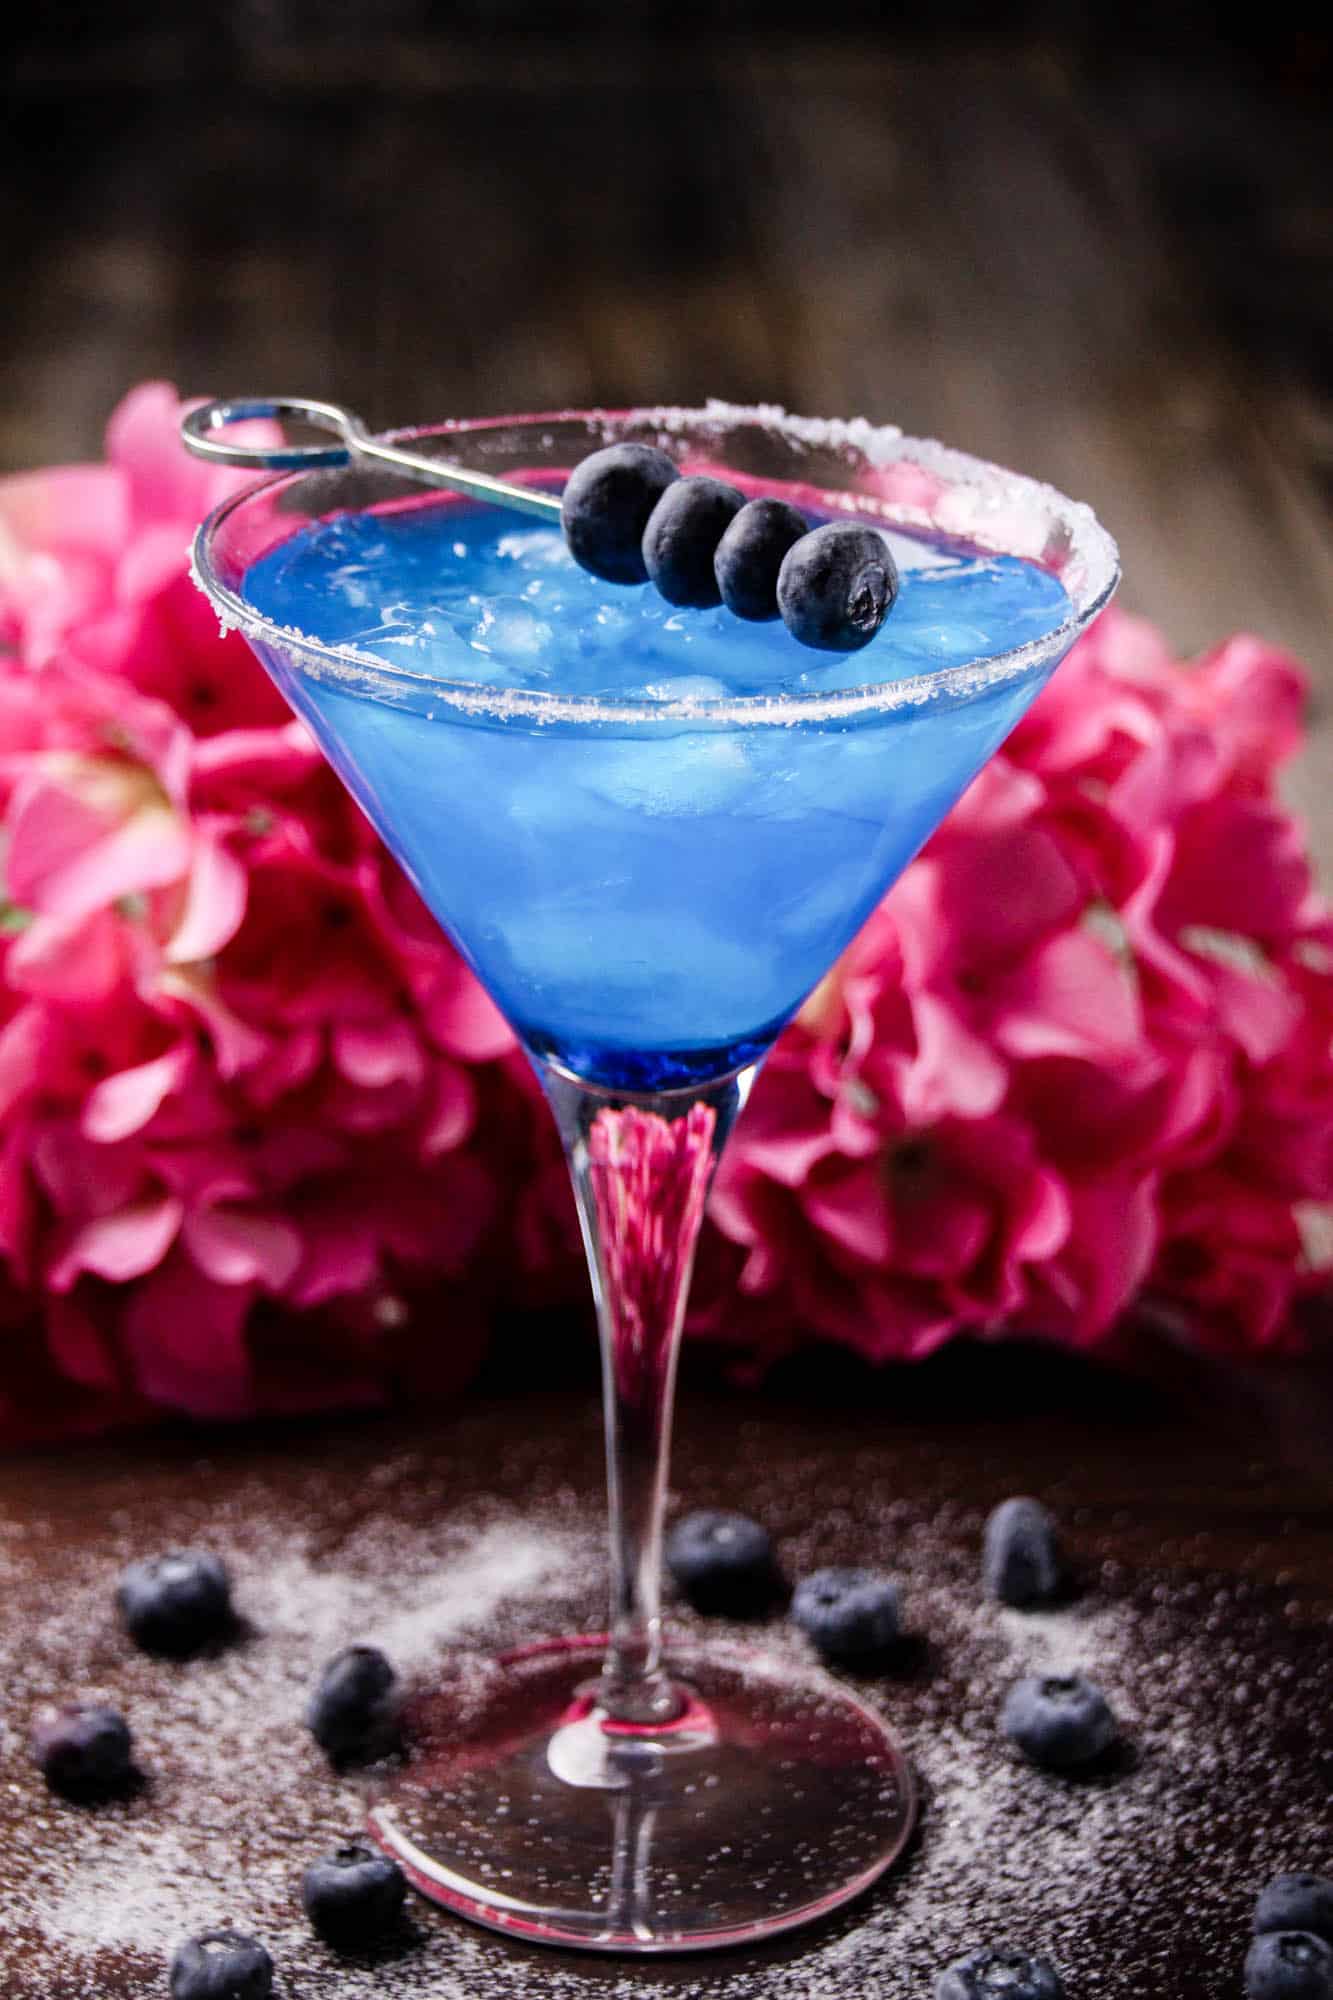 Make this delicious blueberry margarita cocktail in minutes! You'll taste the margarita flavor with a pretty blue color. Use fresh blueberries to adorn the glass and salted sugar on the rim!